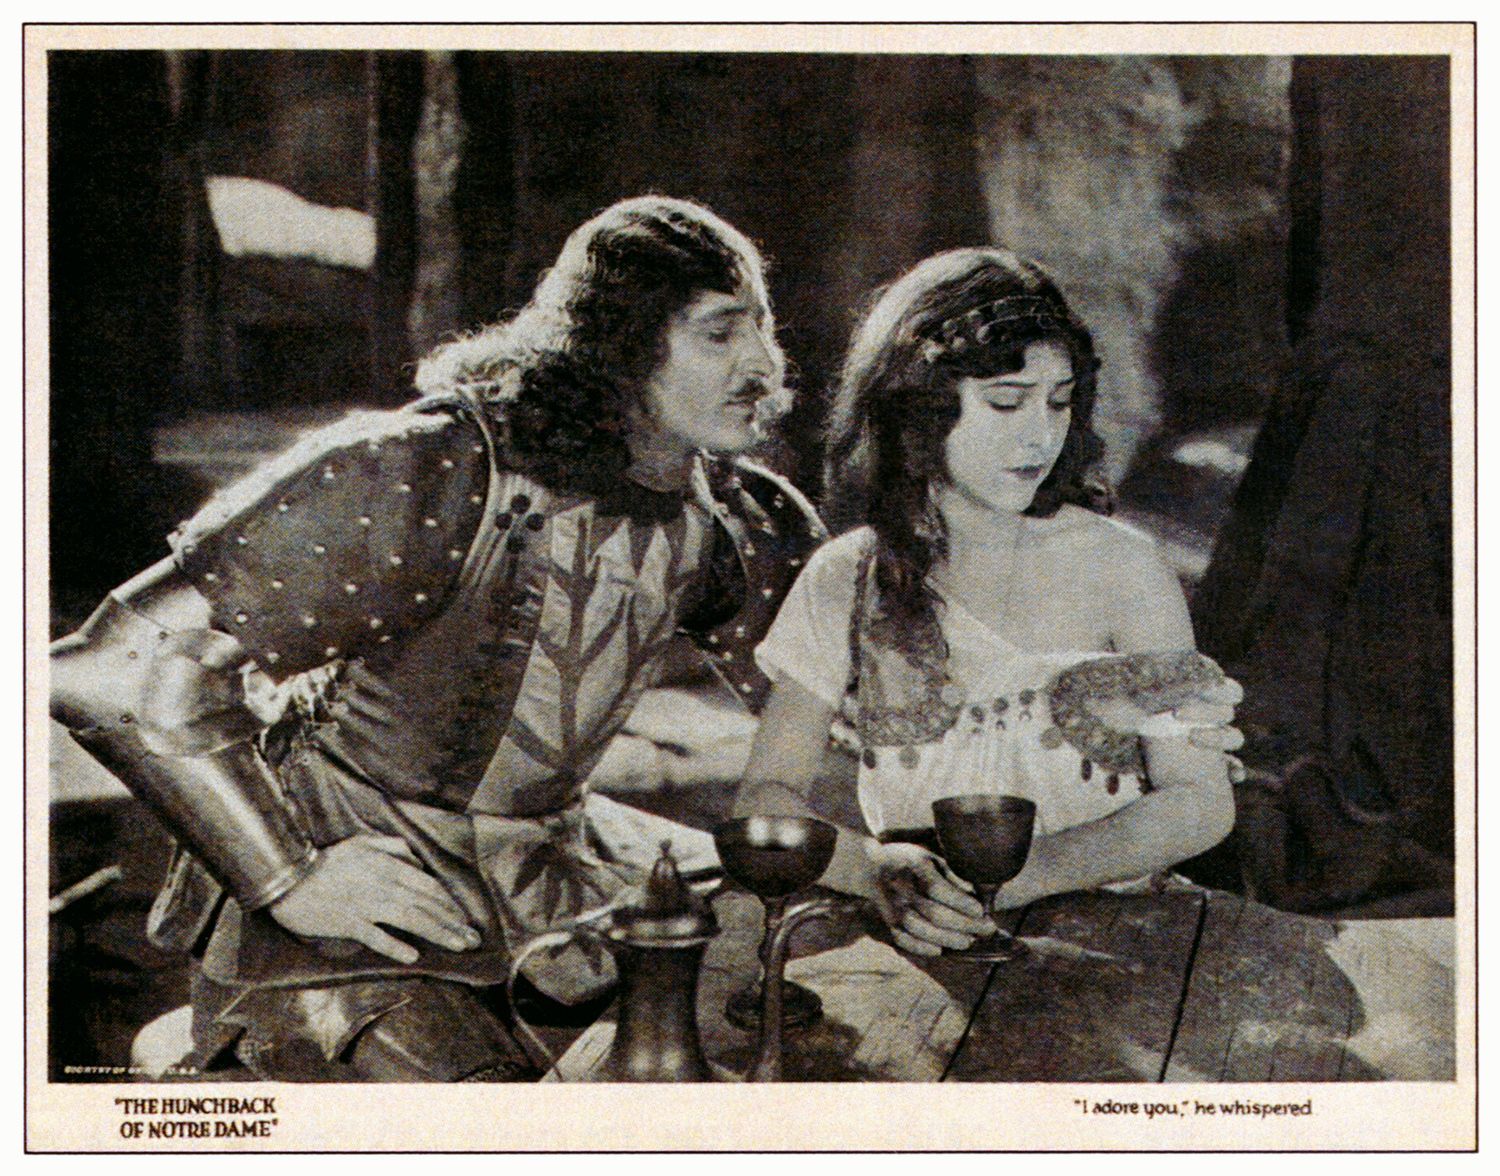 THE HUNCHBACK OF NOTRE DAME, from left: Norman Kerry, Patsy Ruth Miller, 1923.